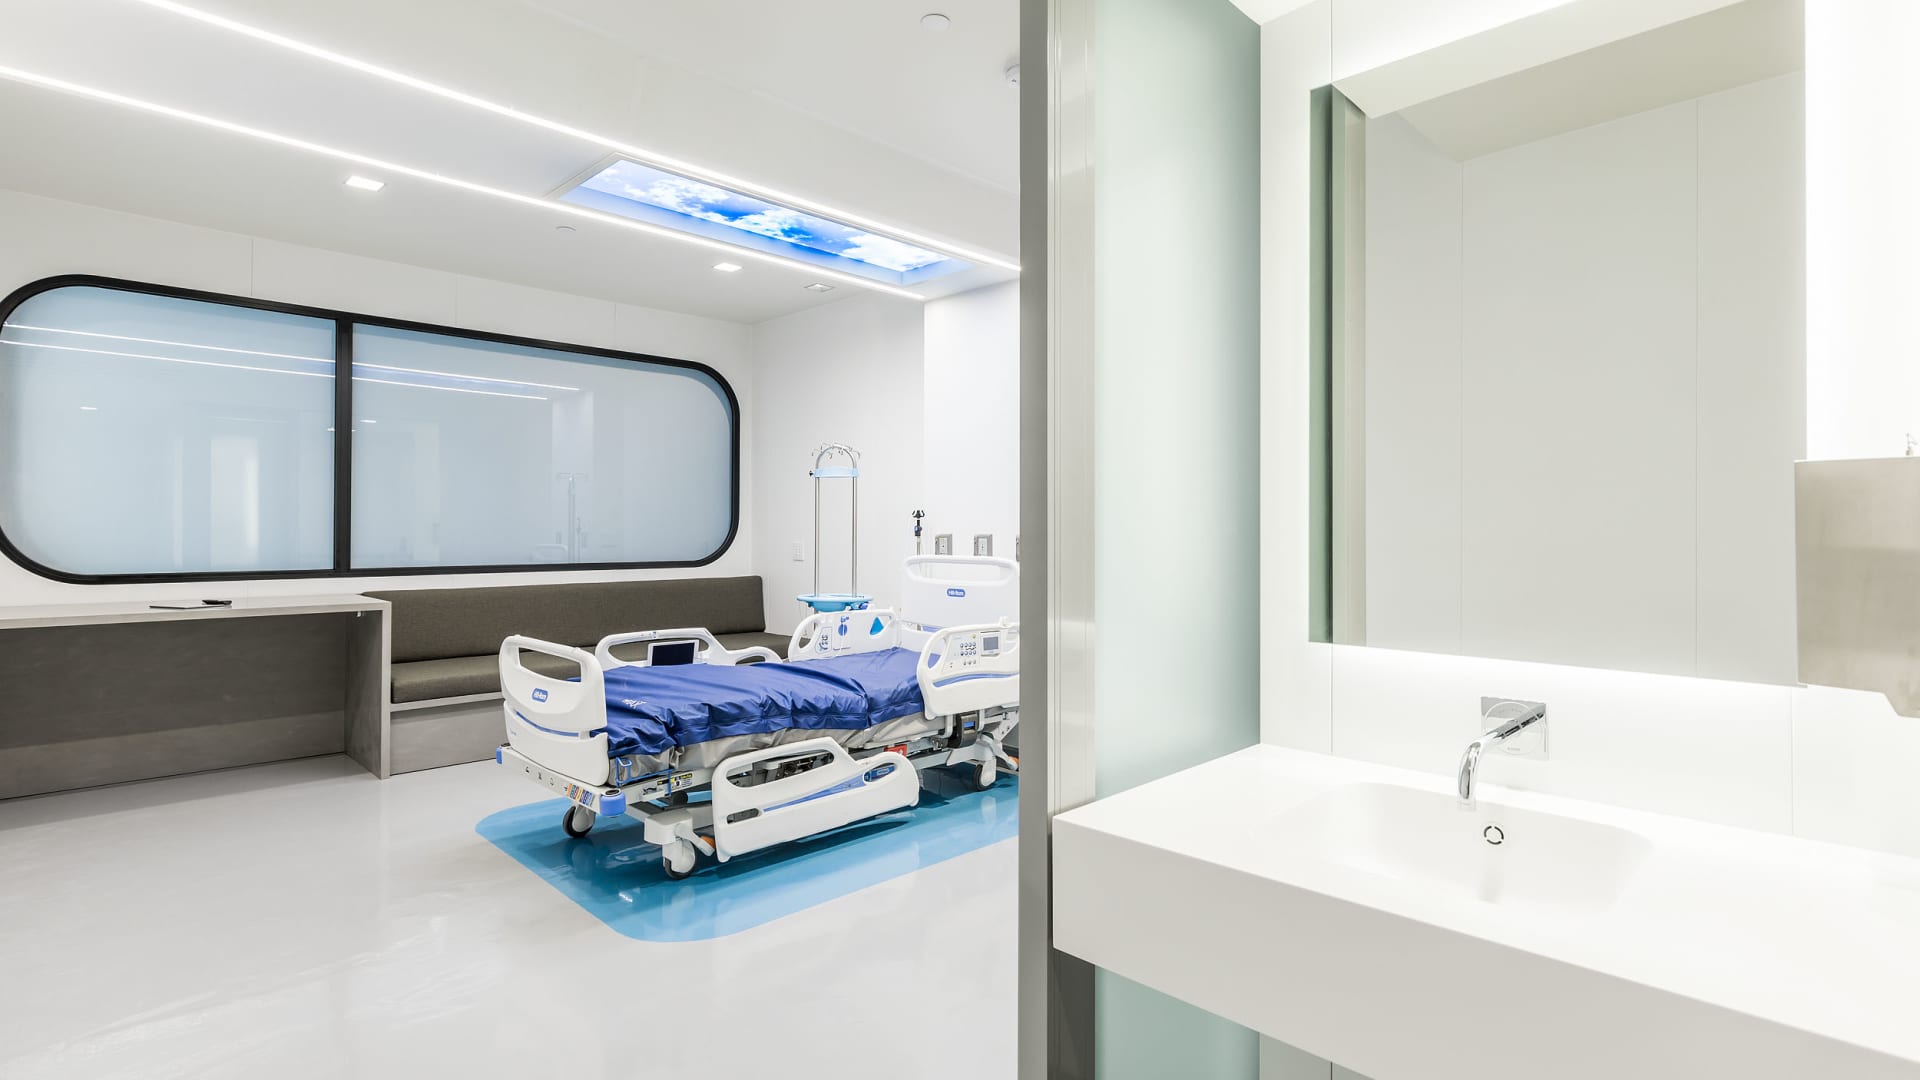 You can now buy an actual hospital room on Amazon